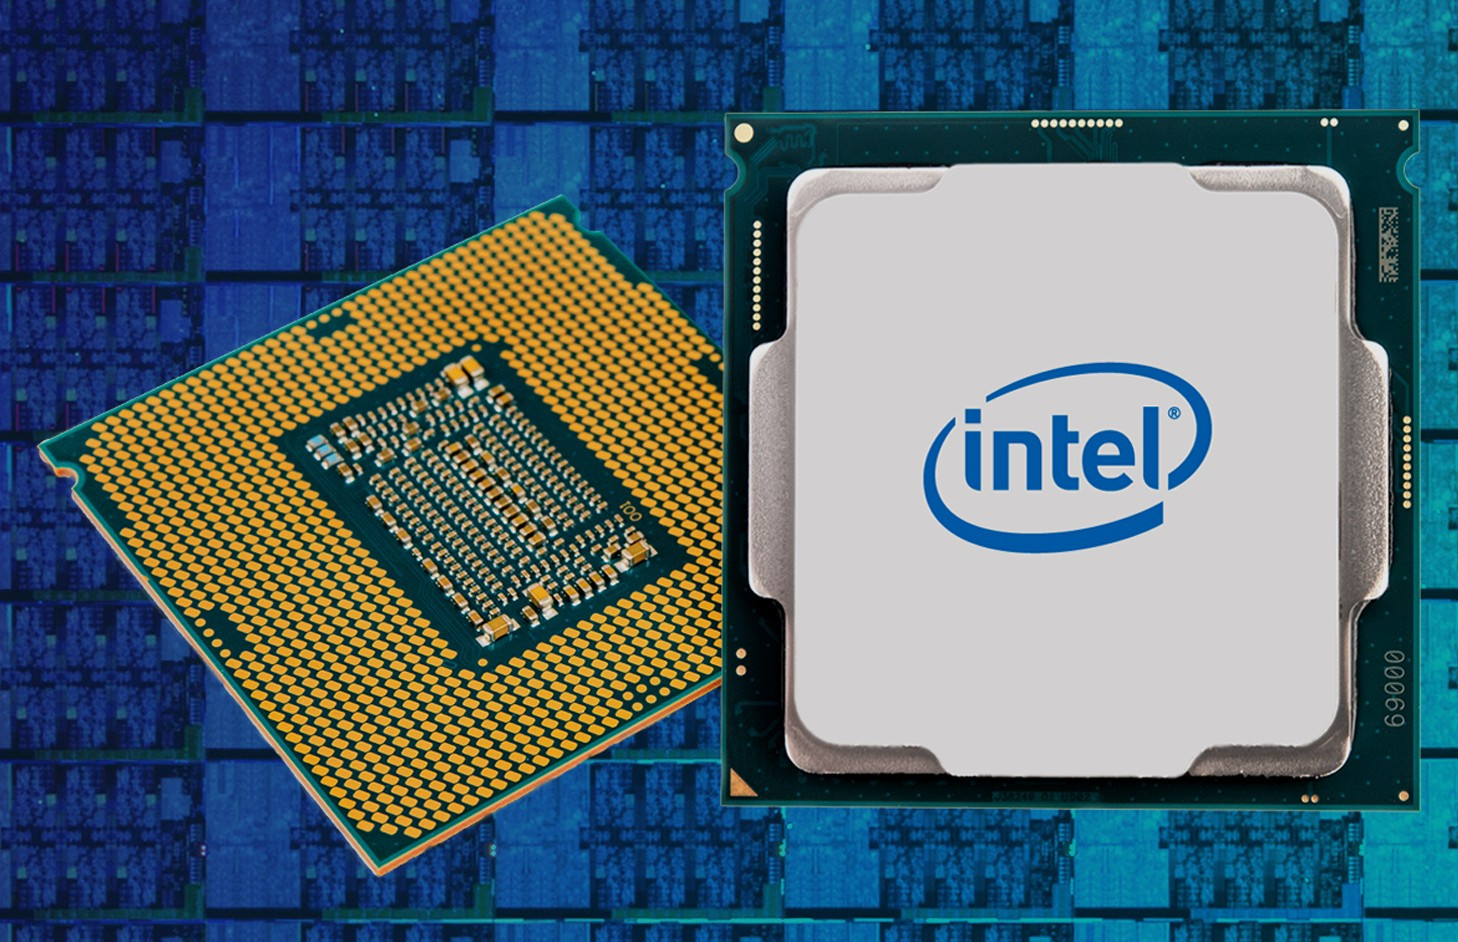 Intel's Z390 chipset rumored to be a rebranded Z370